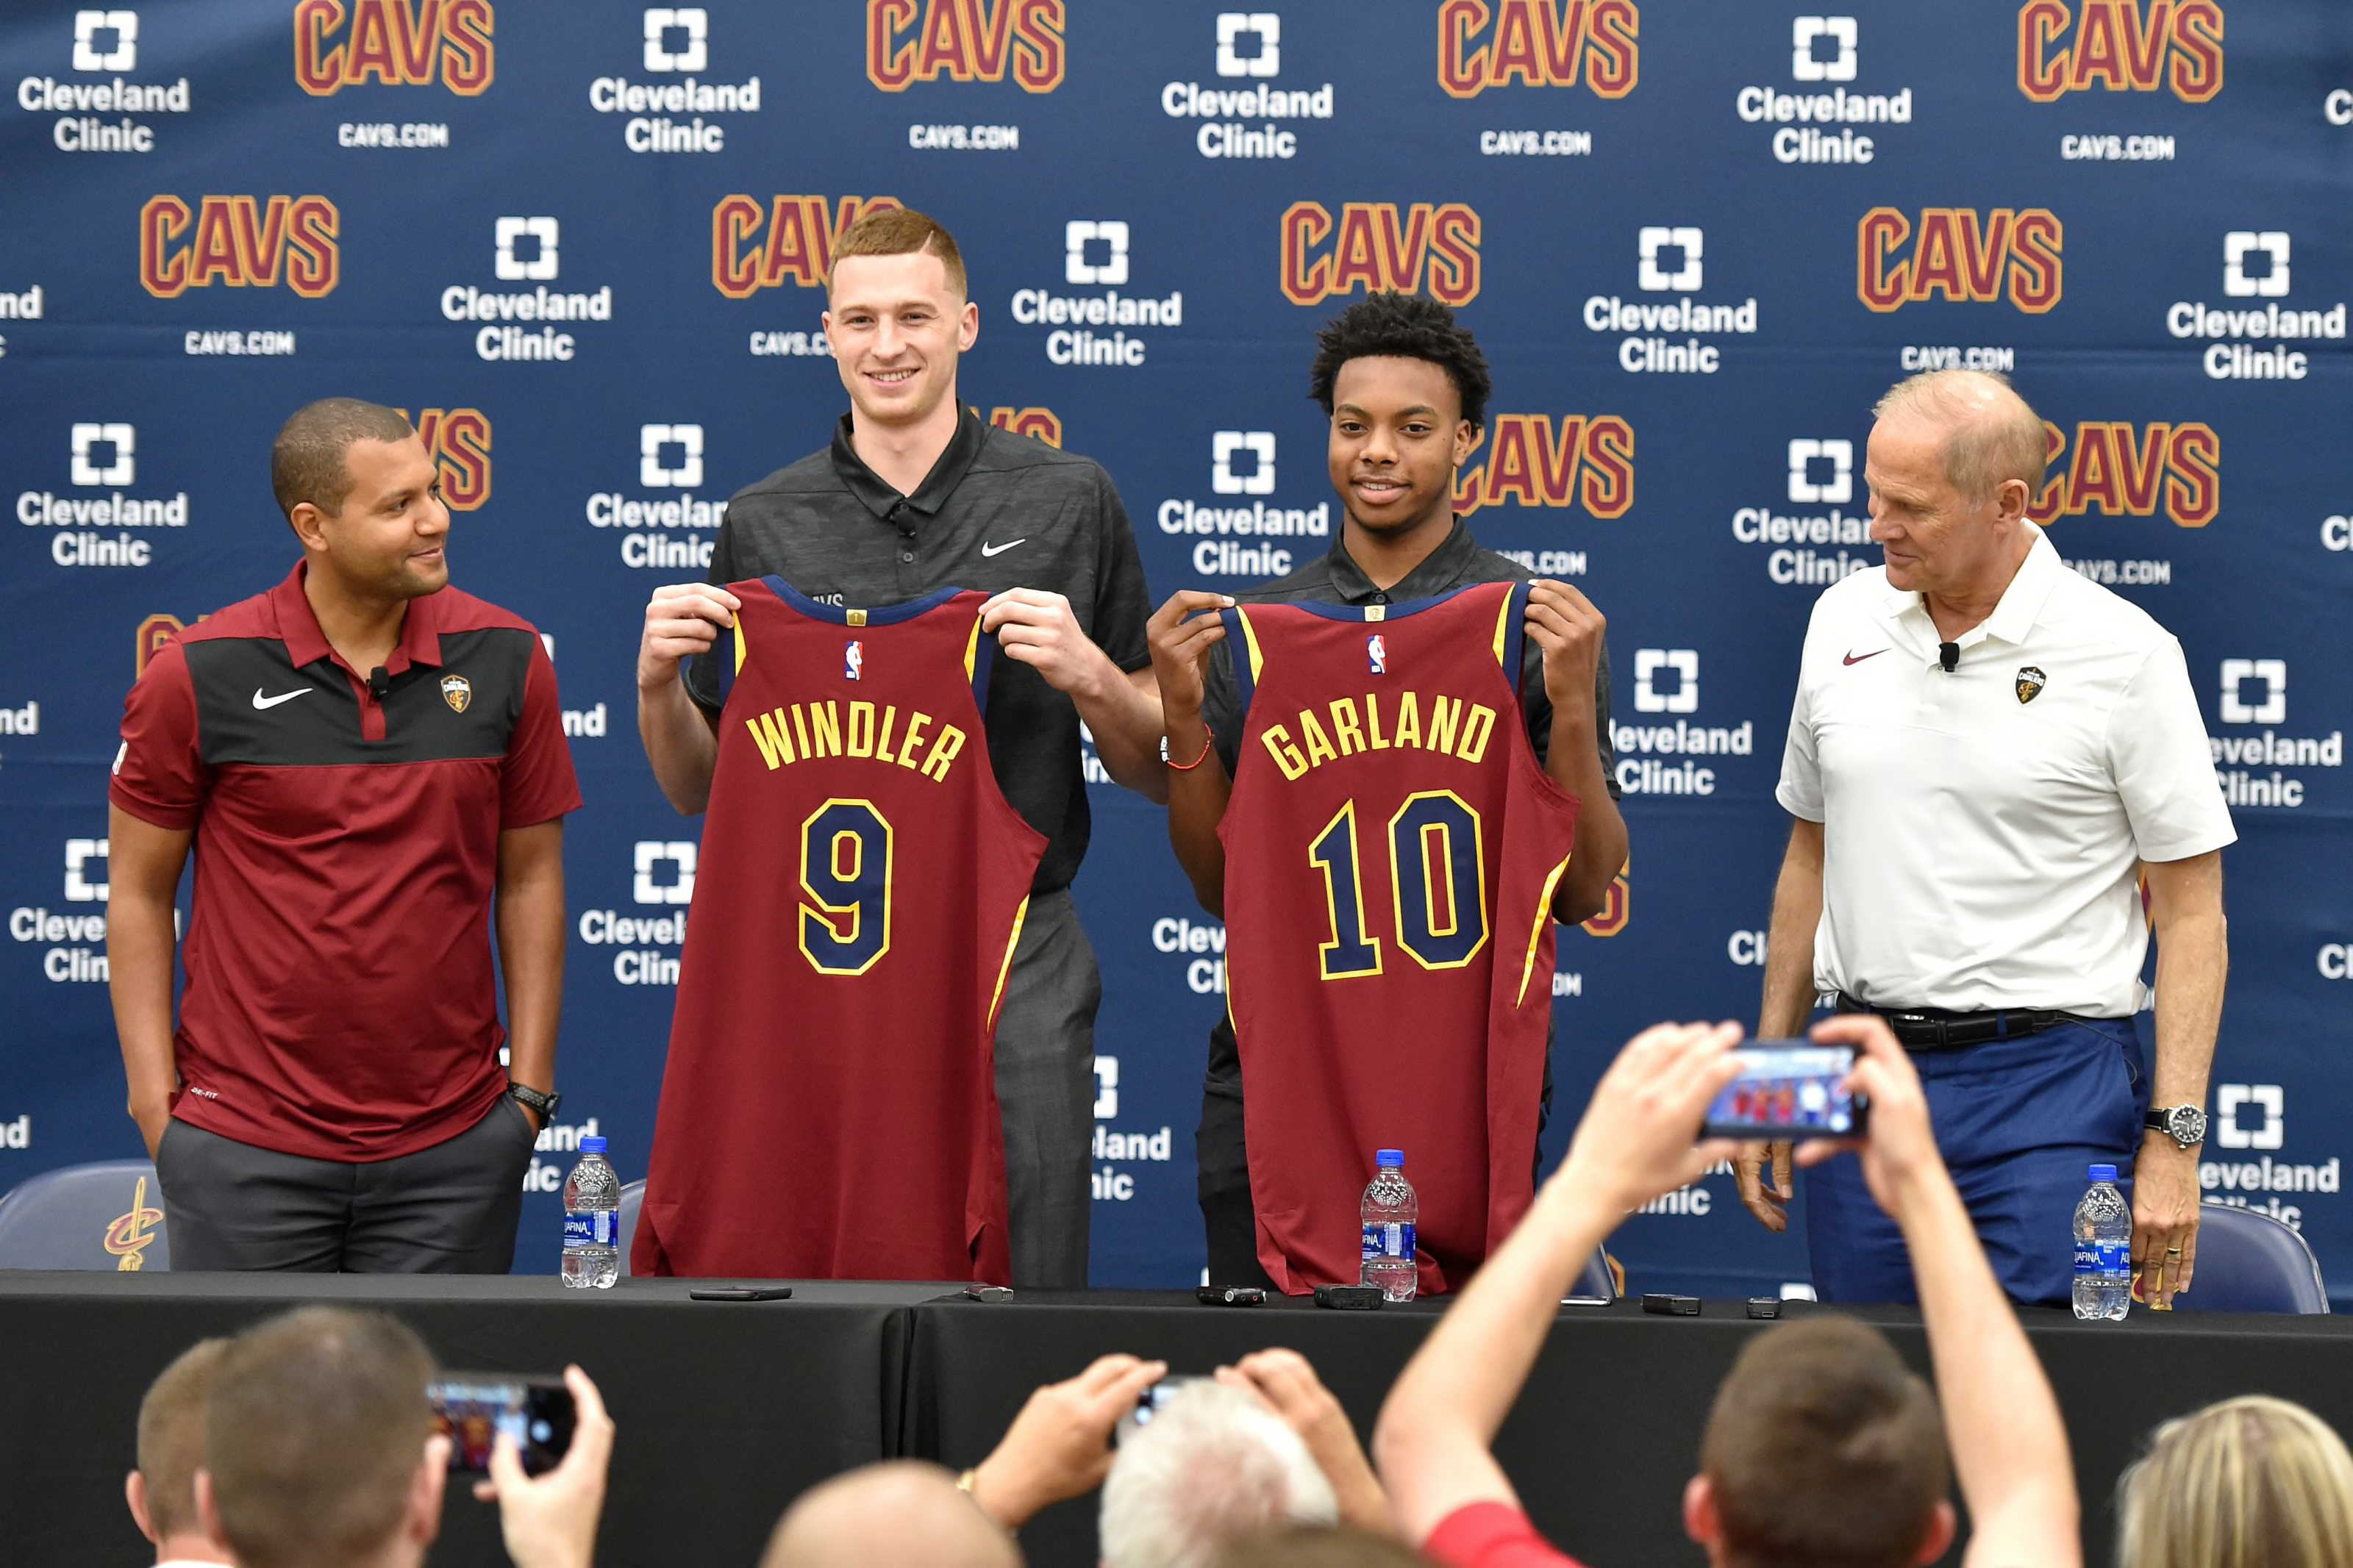 Cleveland Cavaliers - Our 2018-19 Training Camp roster is set for  #CavsMediaDay! MORE: on.nba.com/2O4vOF0